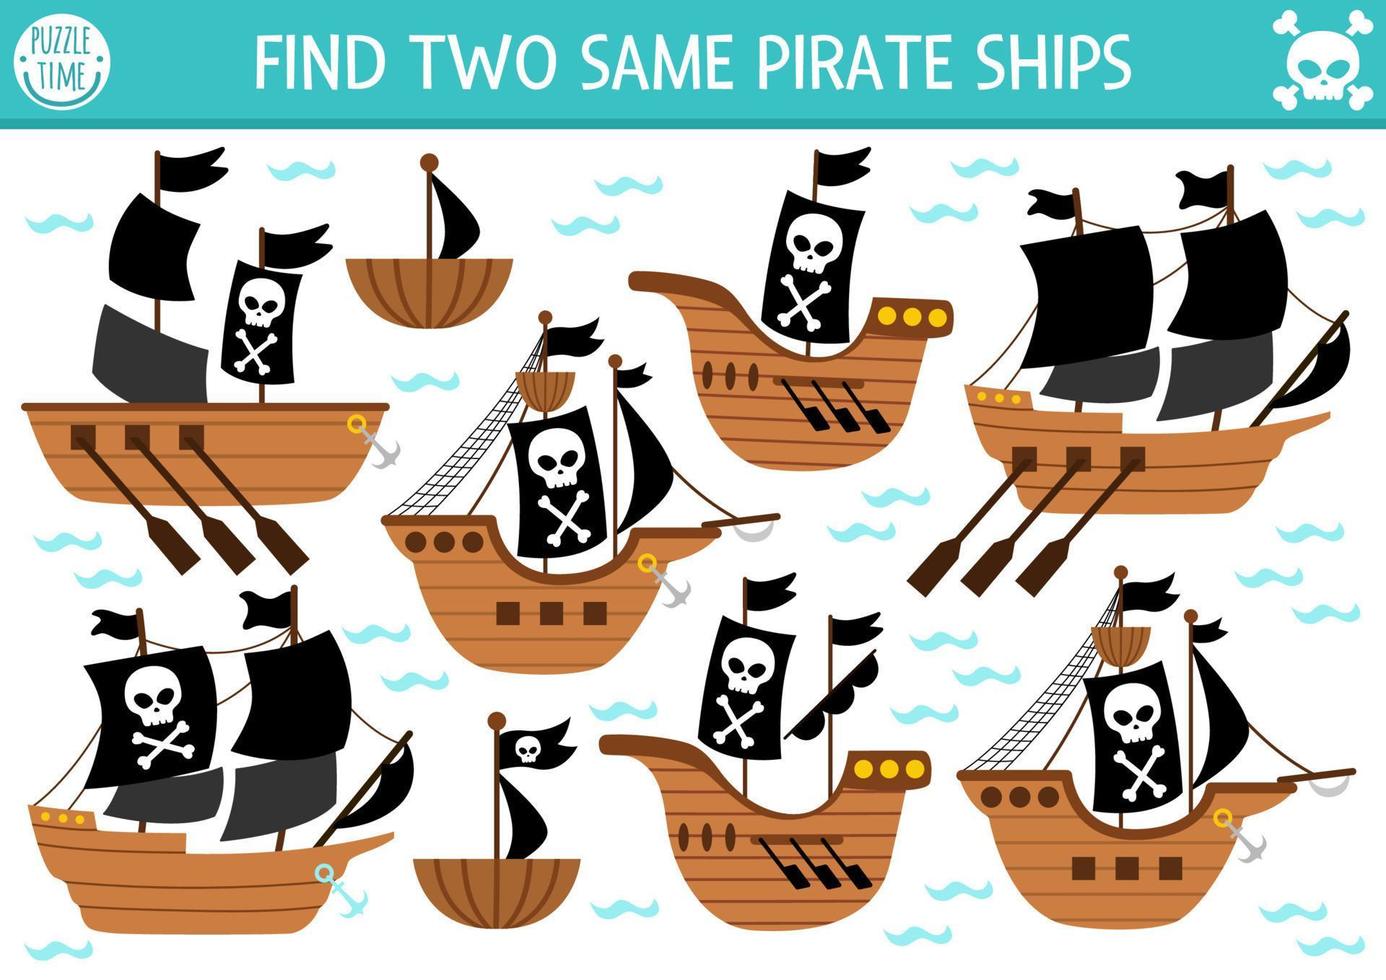 Find two same pirate ships. Treasure island matching activity for children. Sea adventures educational quiz worksheet for kids for attention skills. Simple printable game with cute boats vector